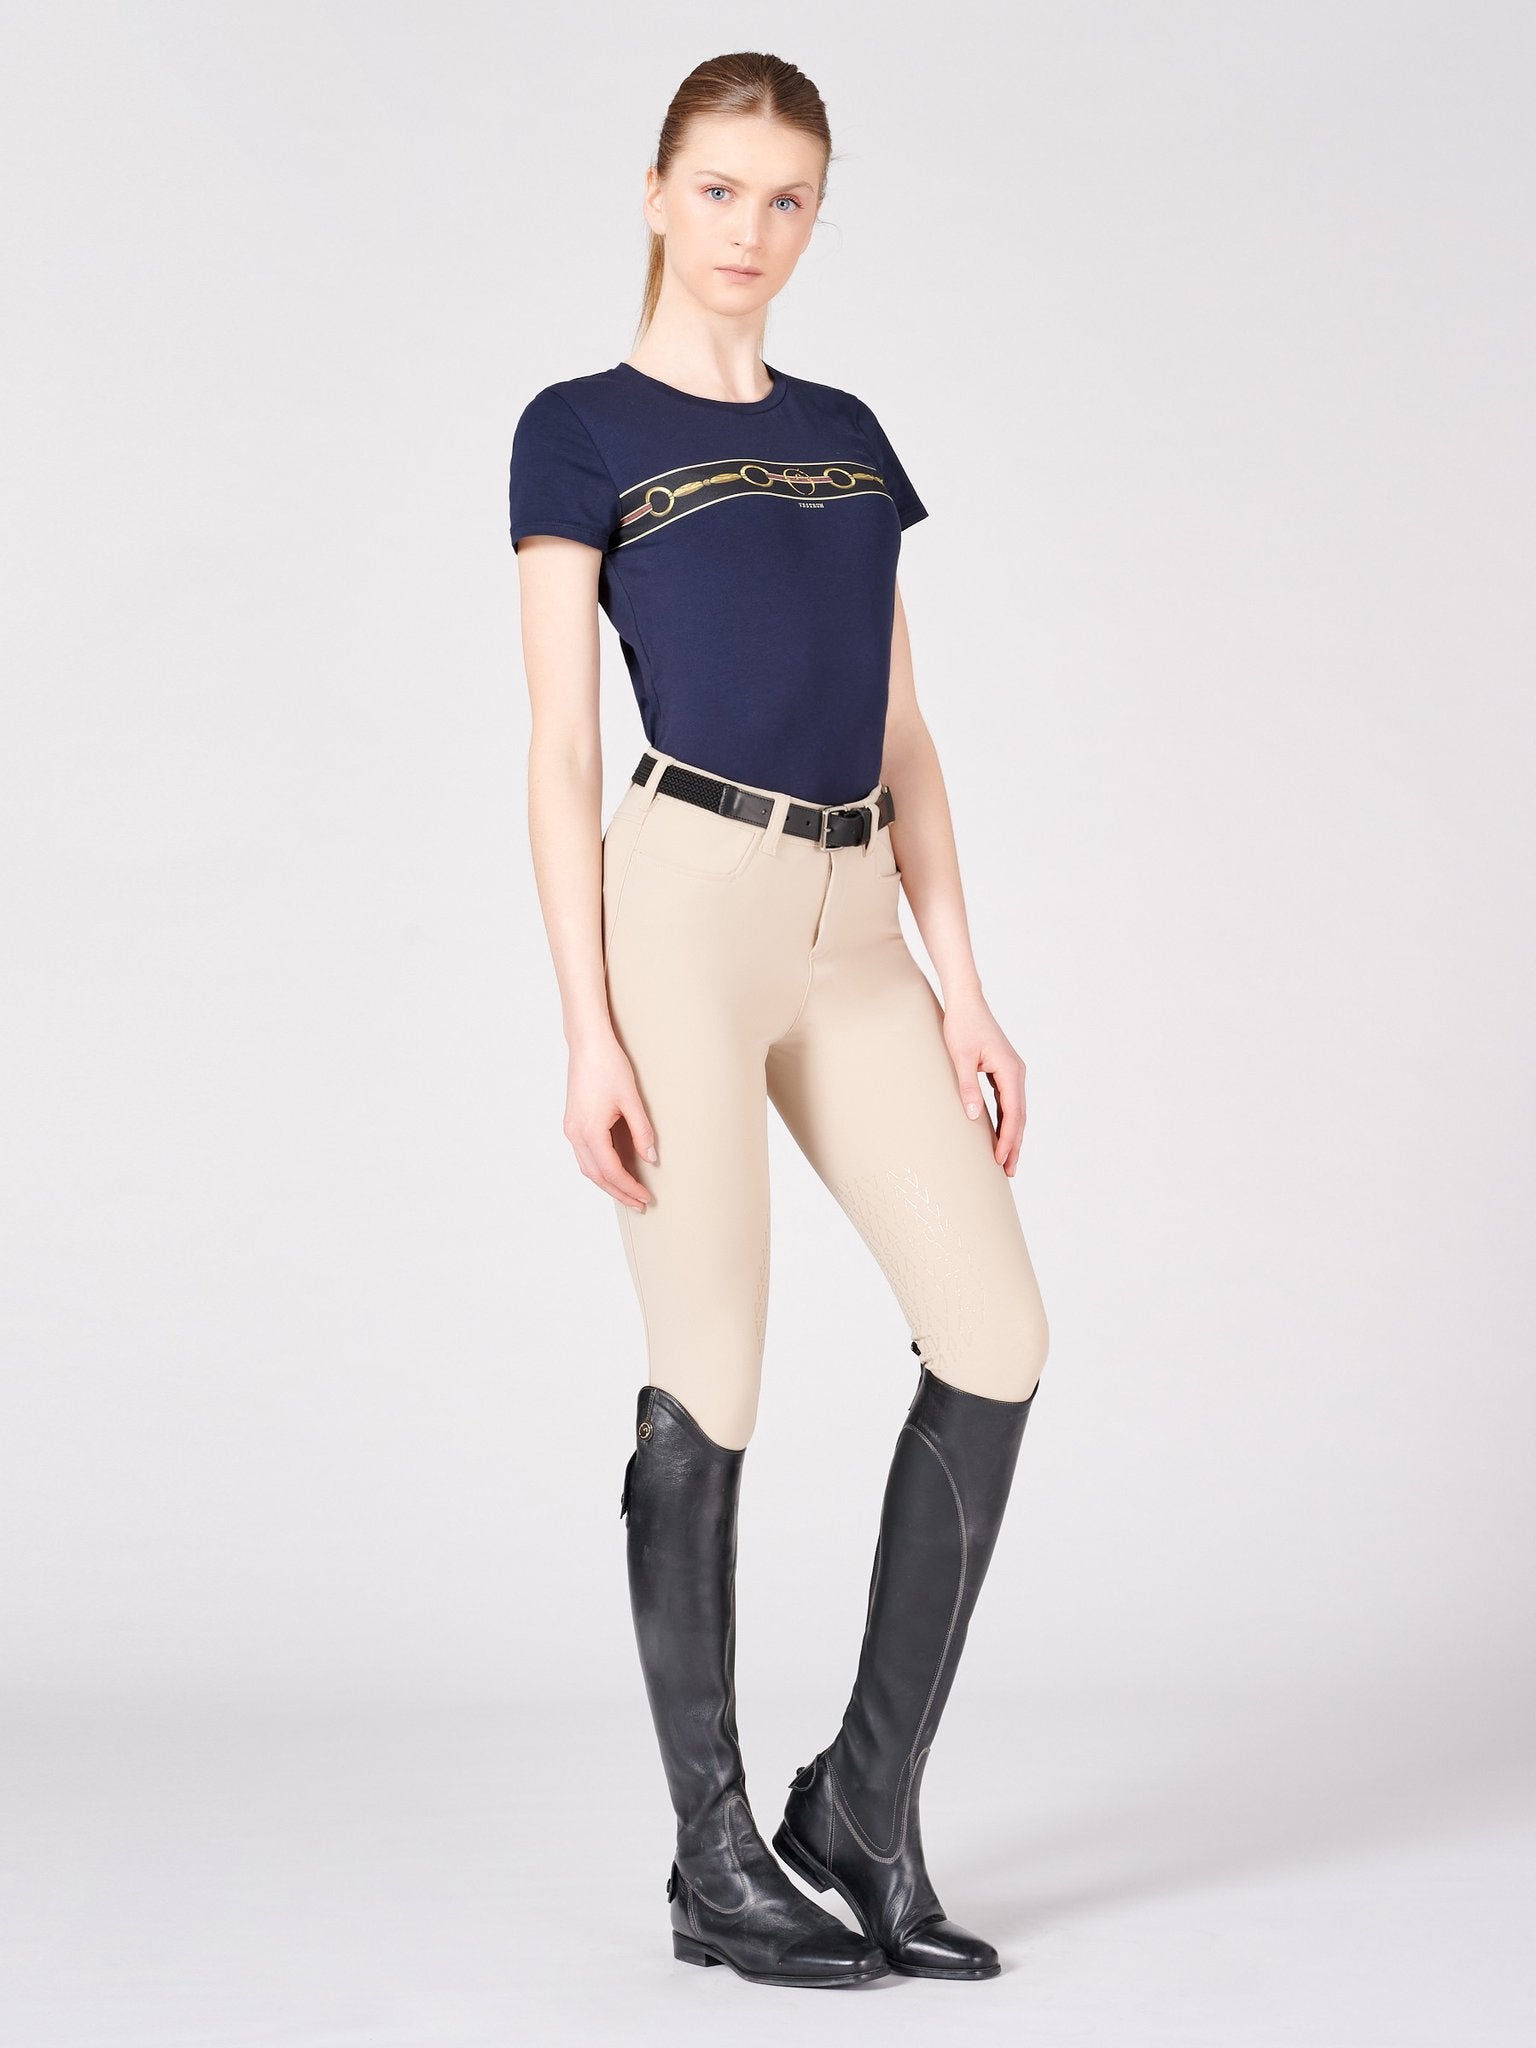 Vestrum Lazise Knee Grip Women's Breeches With Pockets On The Back